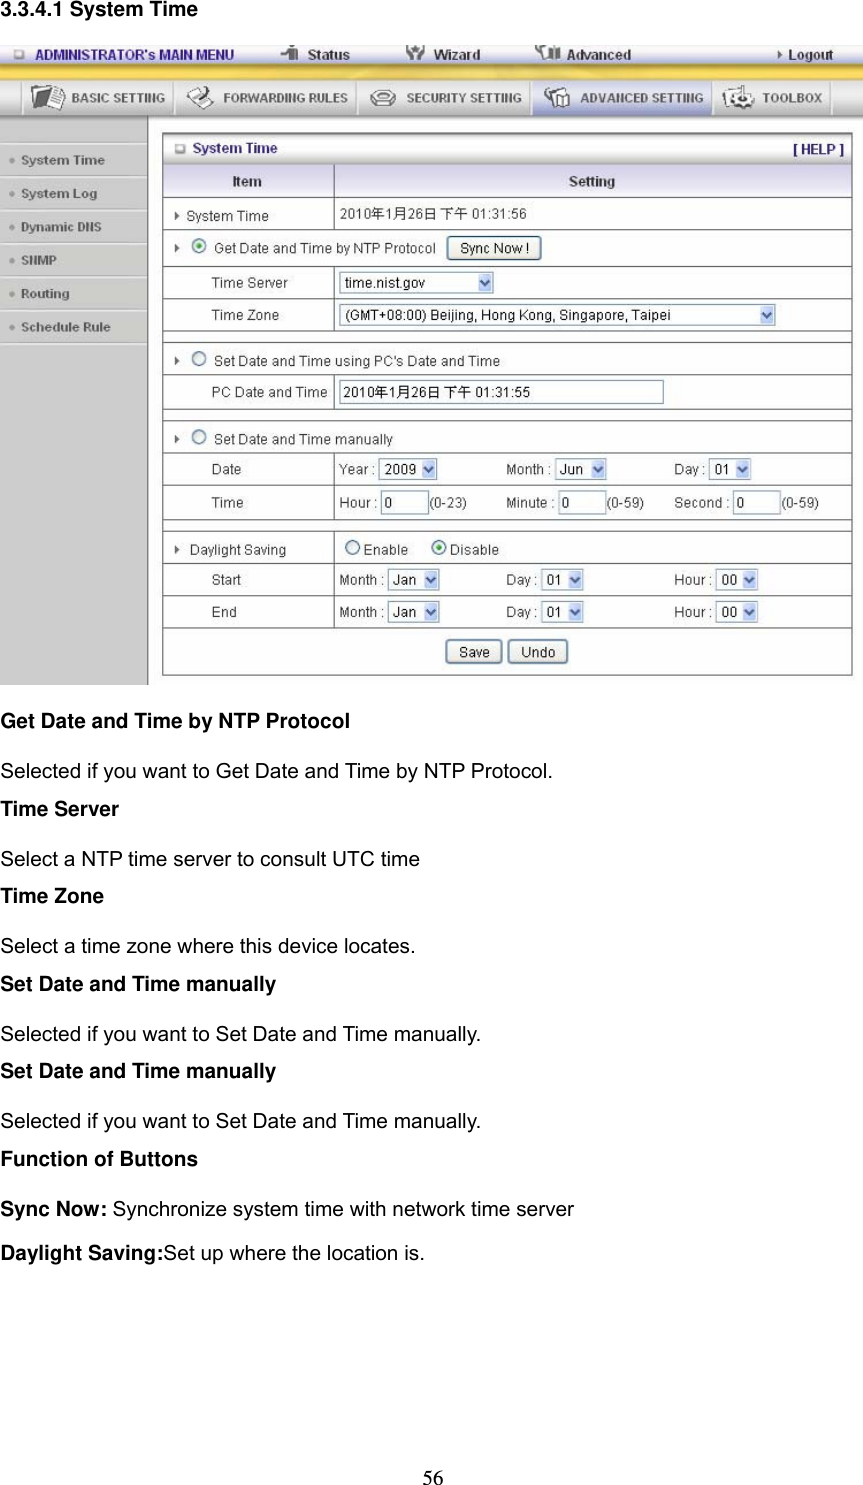  563.3.4.1 System Time  Get Date and Time by NTP Protocol Selected if you want to Get Date and Time by NTP Protocol.   Time Server Select a NTP time server to consult UTC time   Time Zone Select a time zone where this device locates.   Set Date and Time manually Selected if you want to Set Date and Time manually.   Set Date and Time manually Selected if you want to Set Date and Time manually. Function of Buttons Sync Now: Synchronize system time with network time server Daylight Saving:Set up where the location is. 